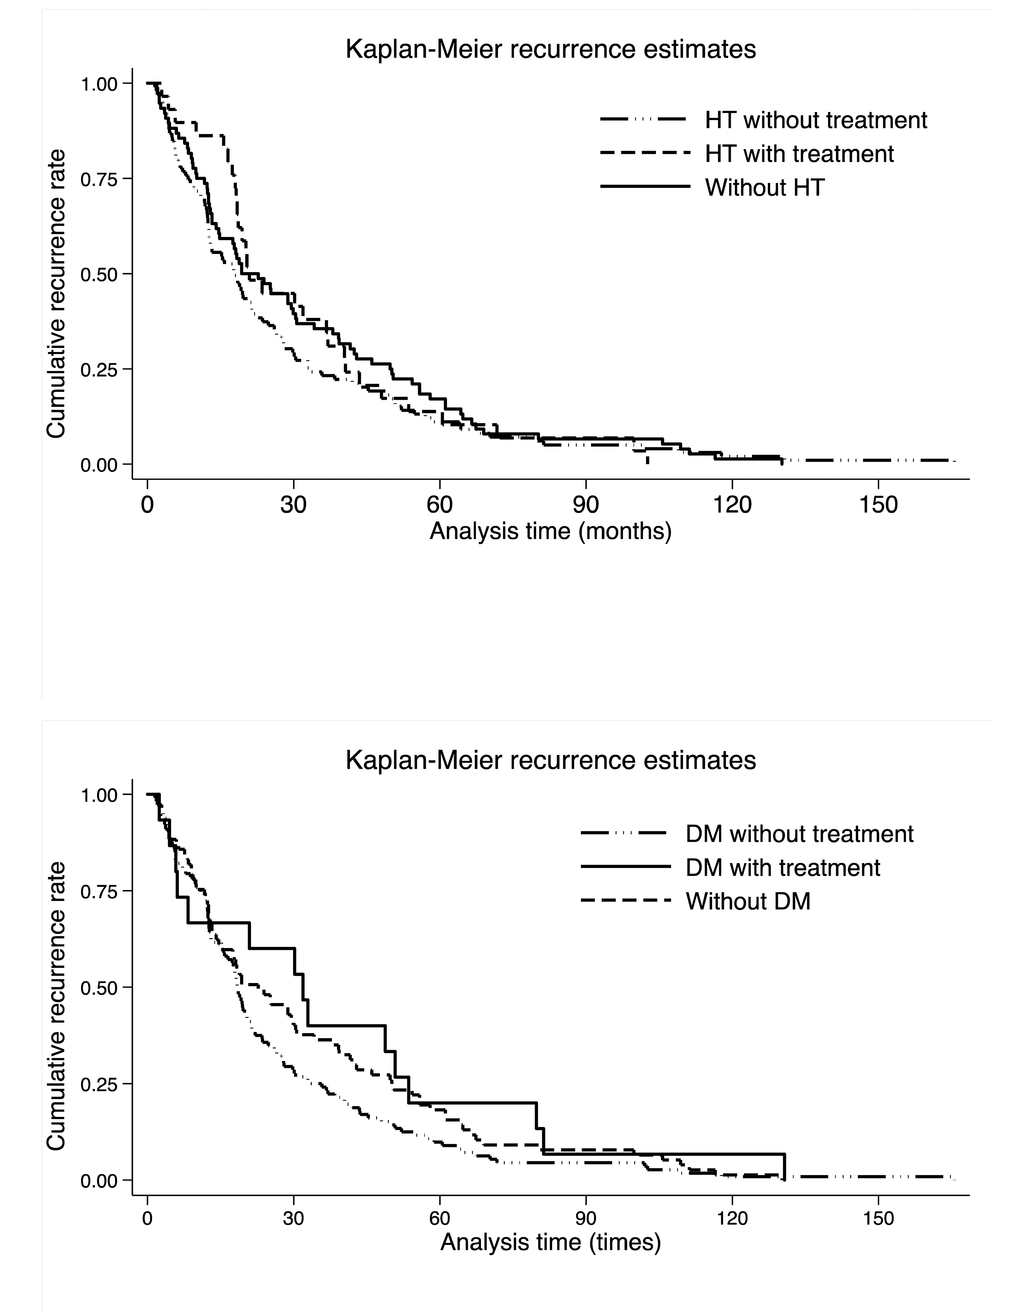 Kaplan-Meier recurrence curves per hypertension (the upper panel) and diabetes mellitus (the lower panel). Abbreviations: HT, hypertension; DM, diabetes mellitus. There were 33, 10 and 17 colorectal cancer patients without hypertension, with untreated hypertension and with treated hypertension, respectively. There were 17, 38 and 5 colorectal cancer patients without diabetes mellitus, with untreated diabetes mellitus and with treated diabetes mellitus, respectively. Log-rank test was not significant for both hypertension and diabetes mellitus medications (p: 0.899 for hypertension and 0.169 for diabetes mellitus).